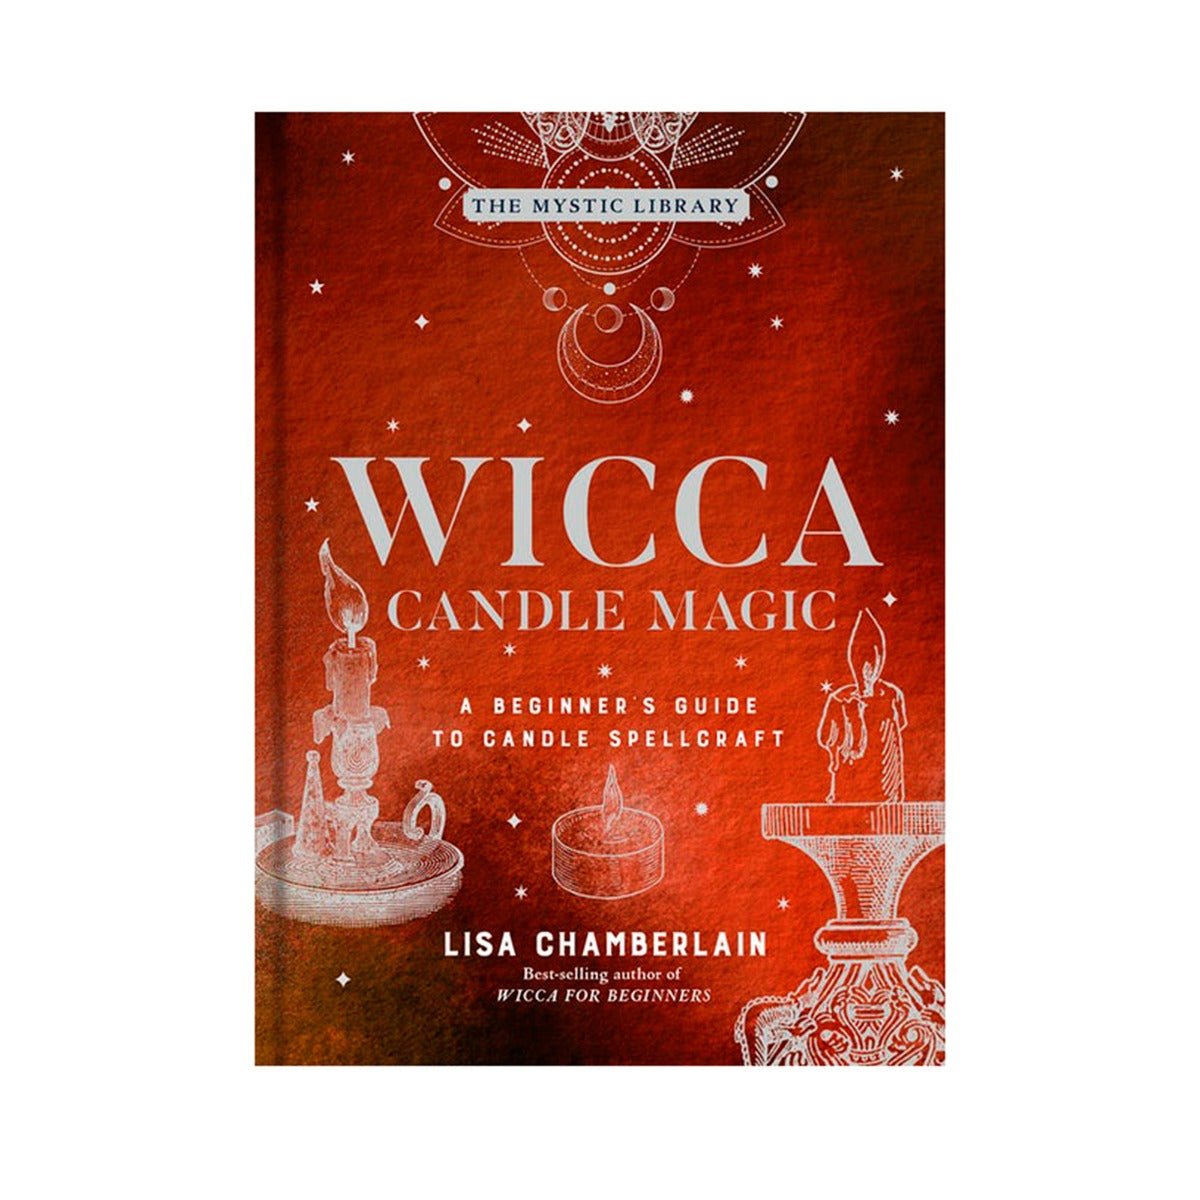 Wicca Candle Magic - 13 Moons